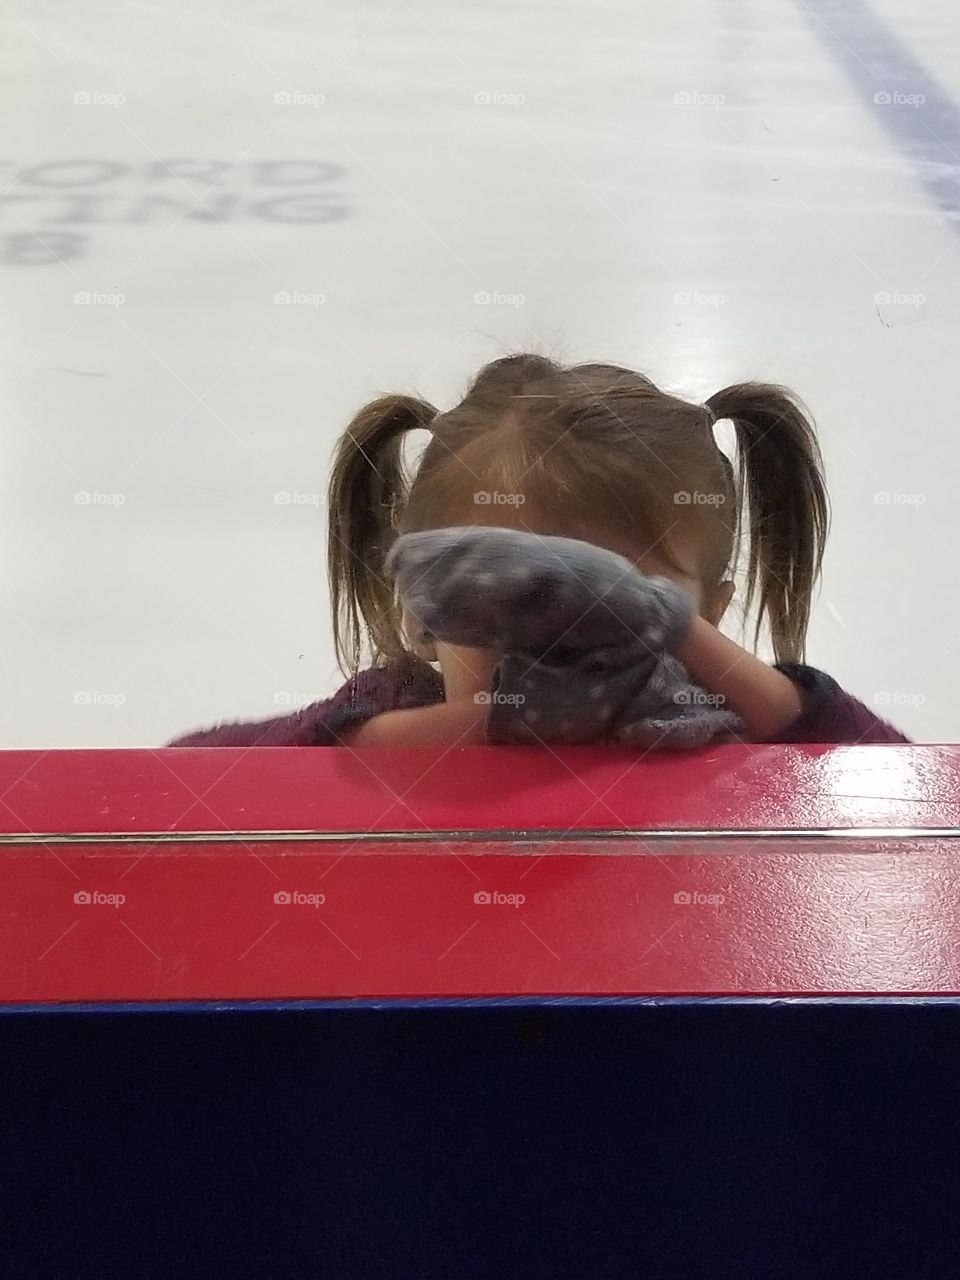 small girl playing peak a boo on ice testing mom